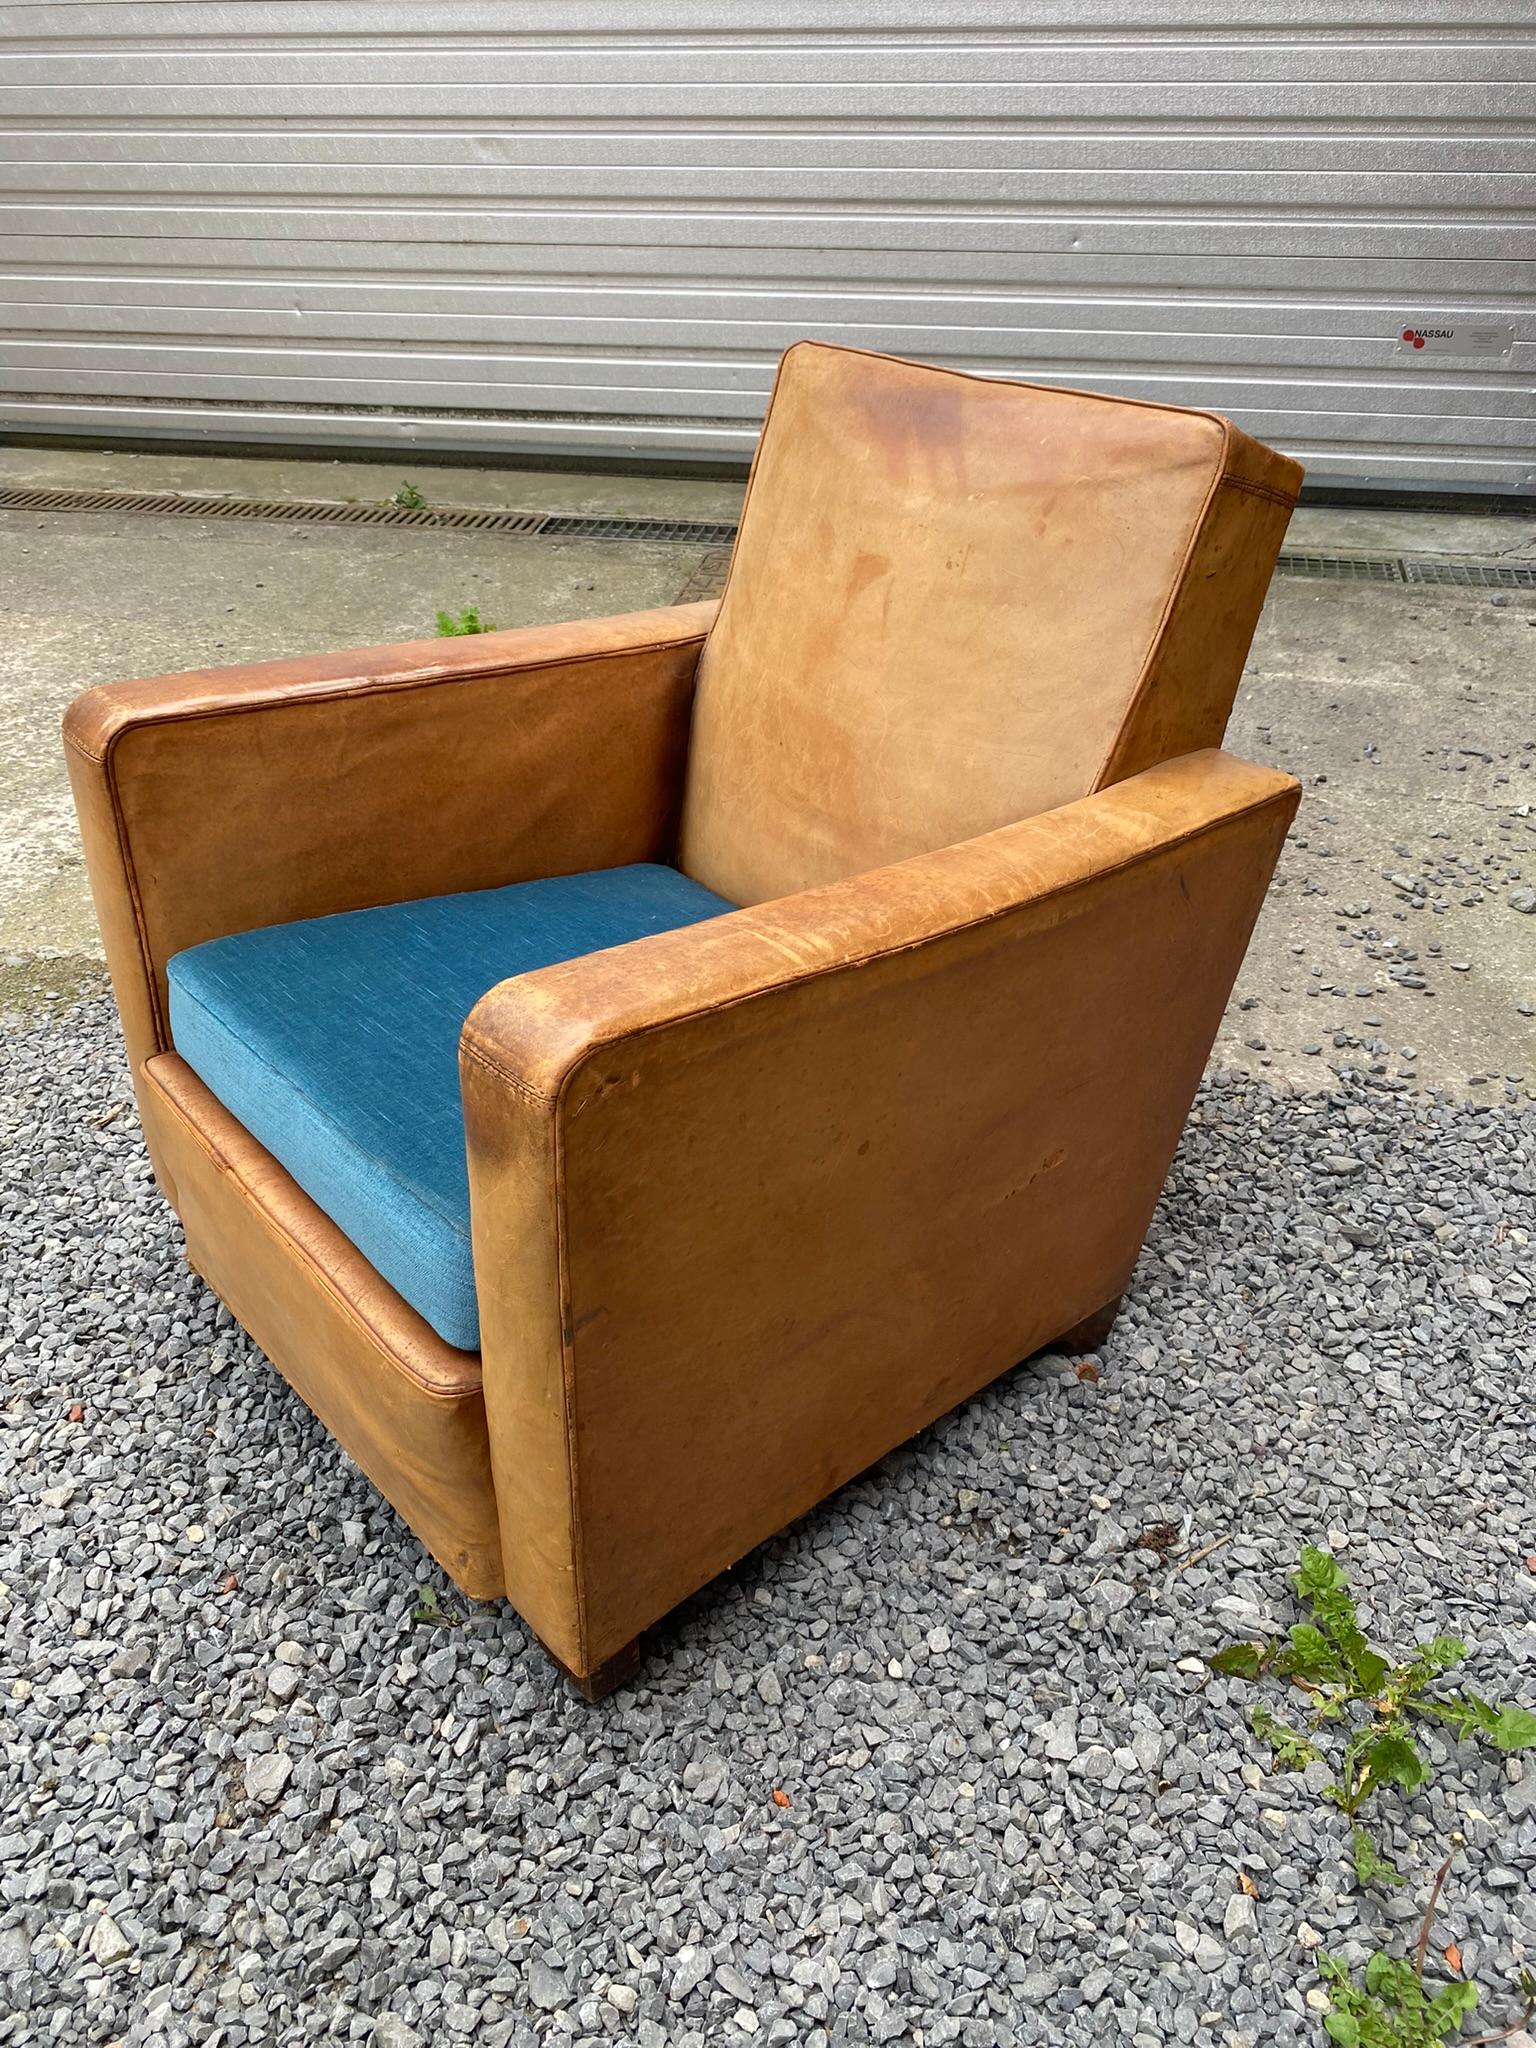 Art Deco Armchairs Covered in Leather, circa 1930 In Fair Condition For Sale In Saint-Ouen, FR